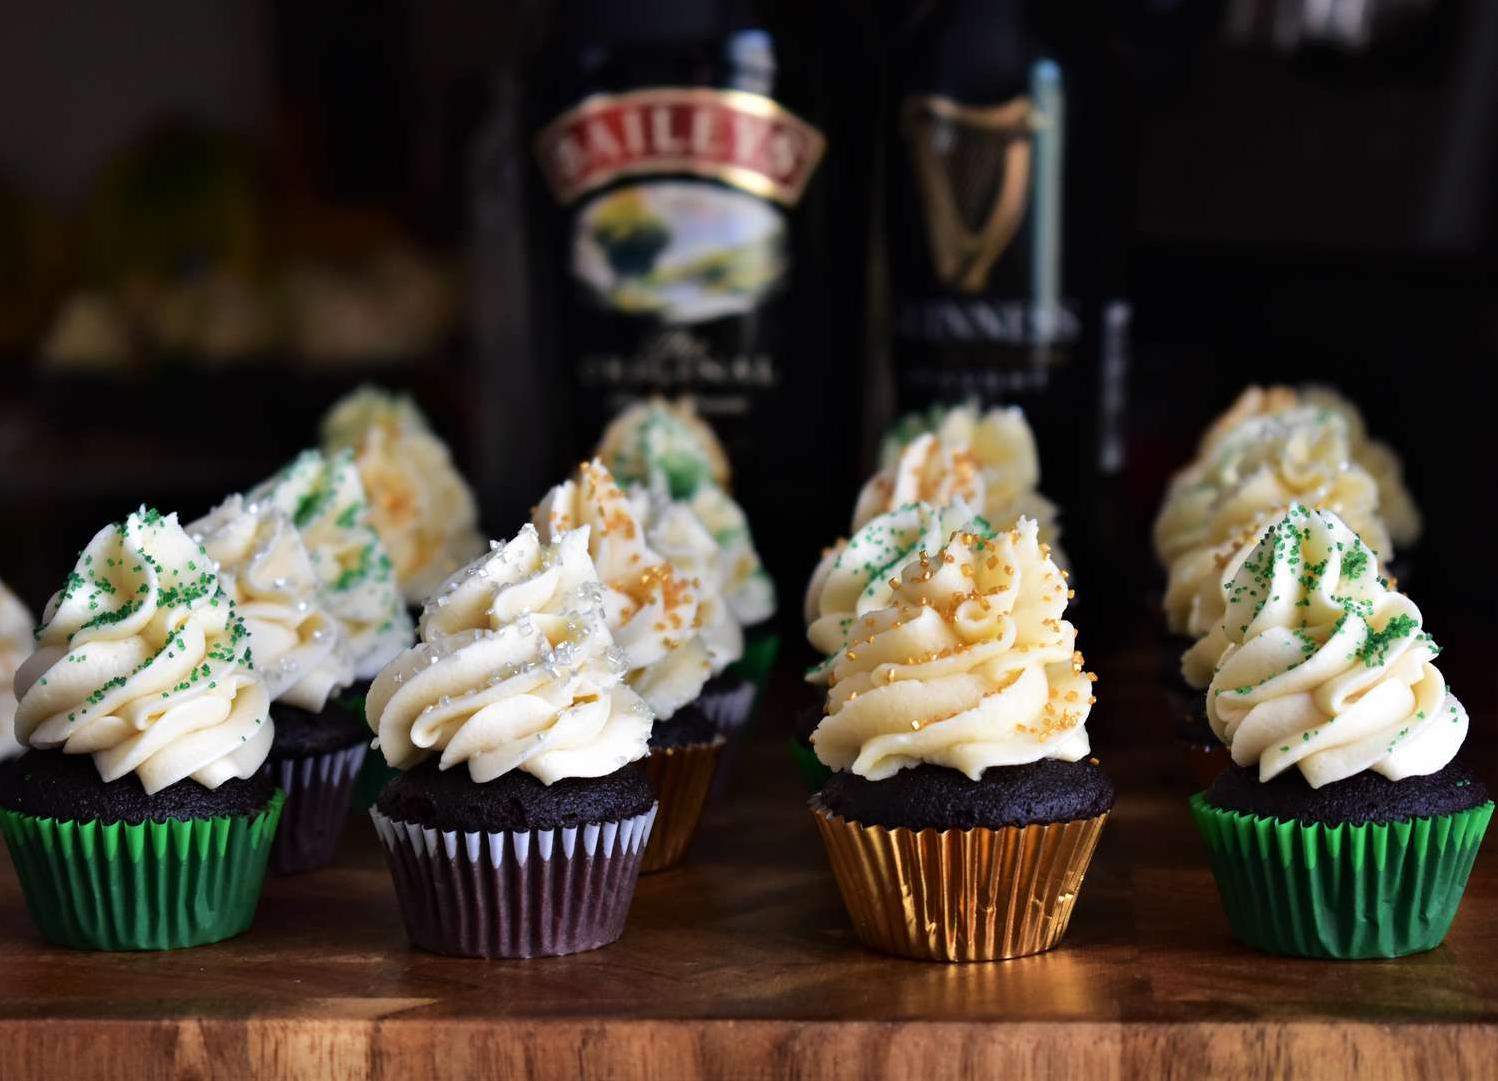  Who needs a pint when you can have a cupcake made with Stout?